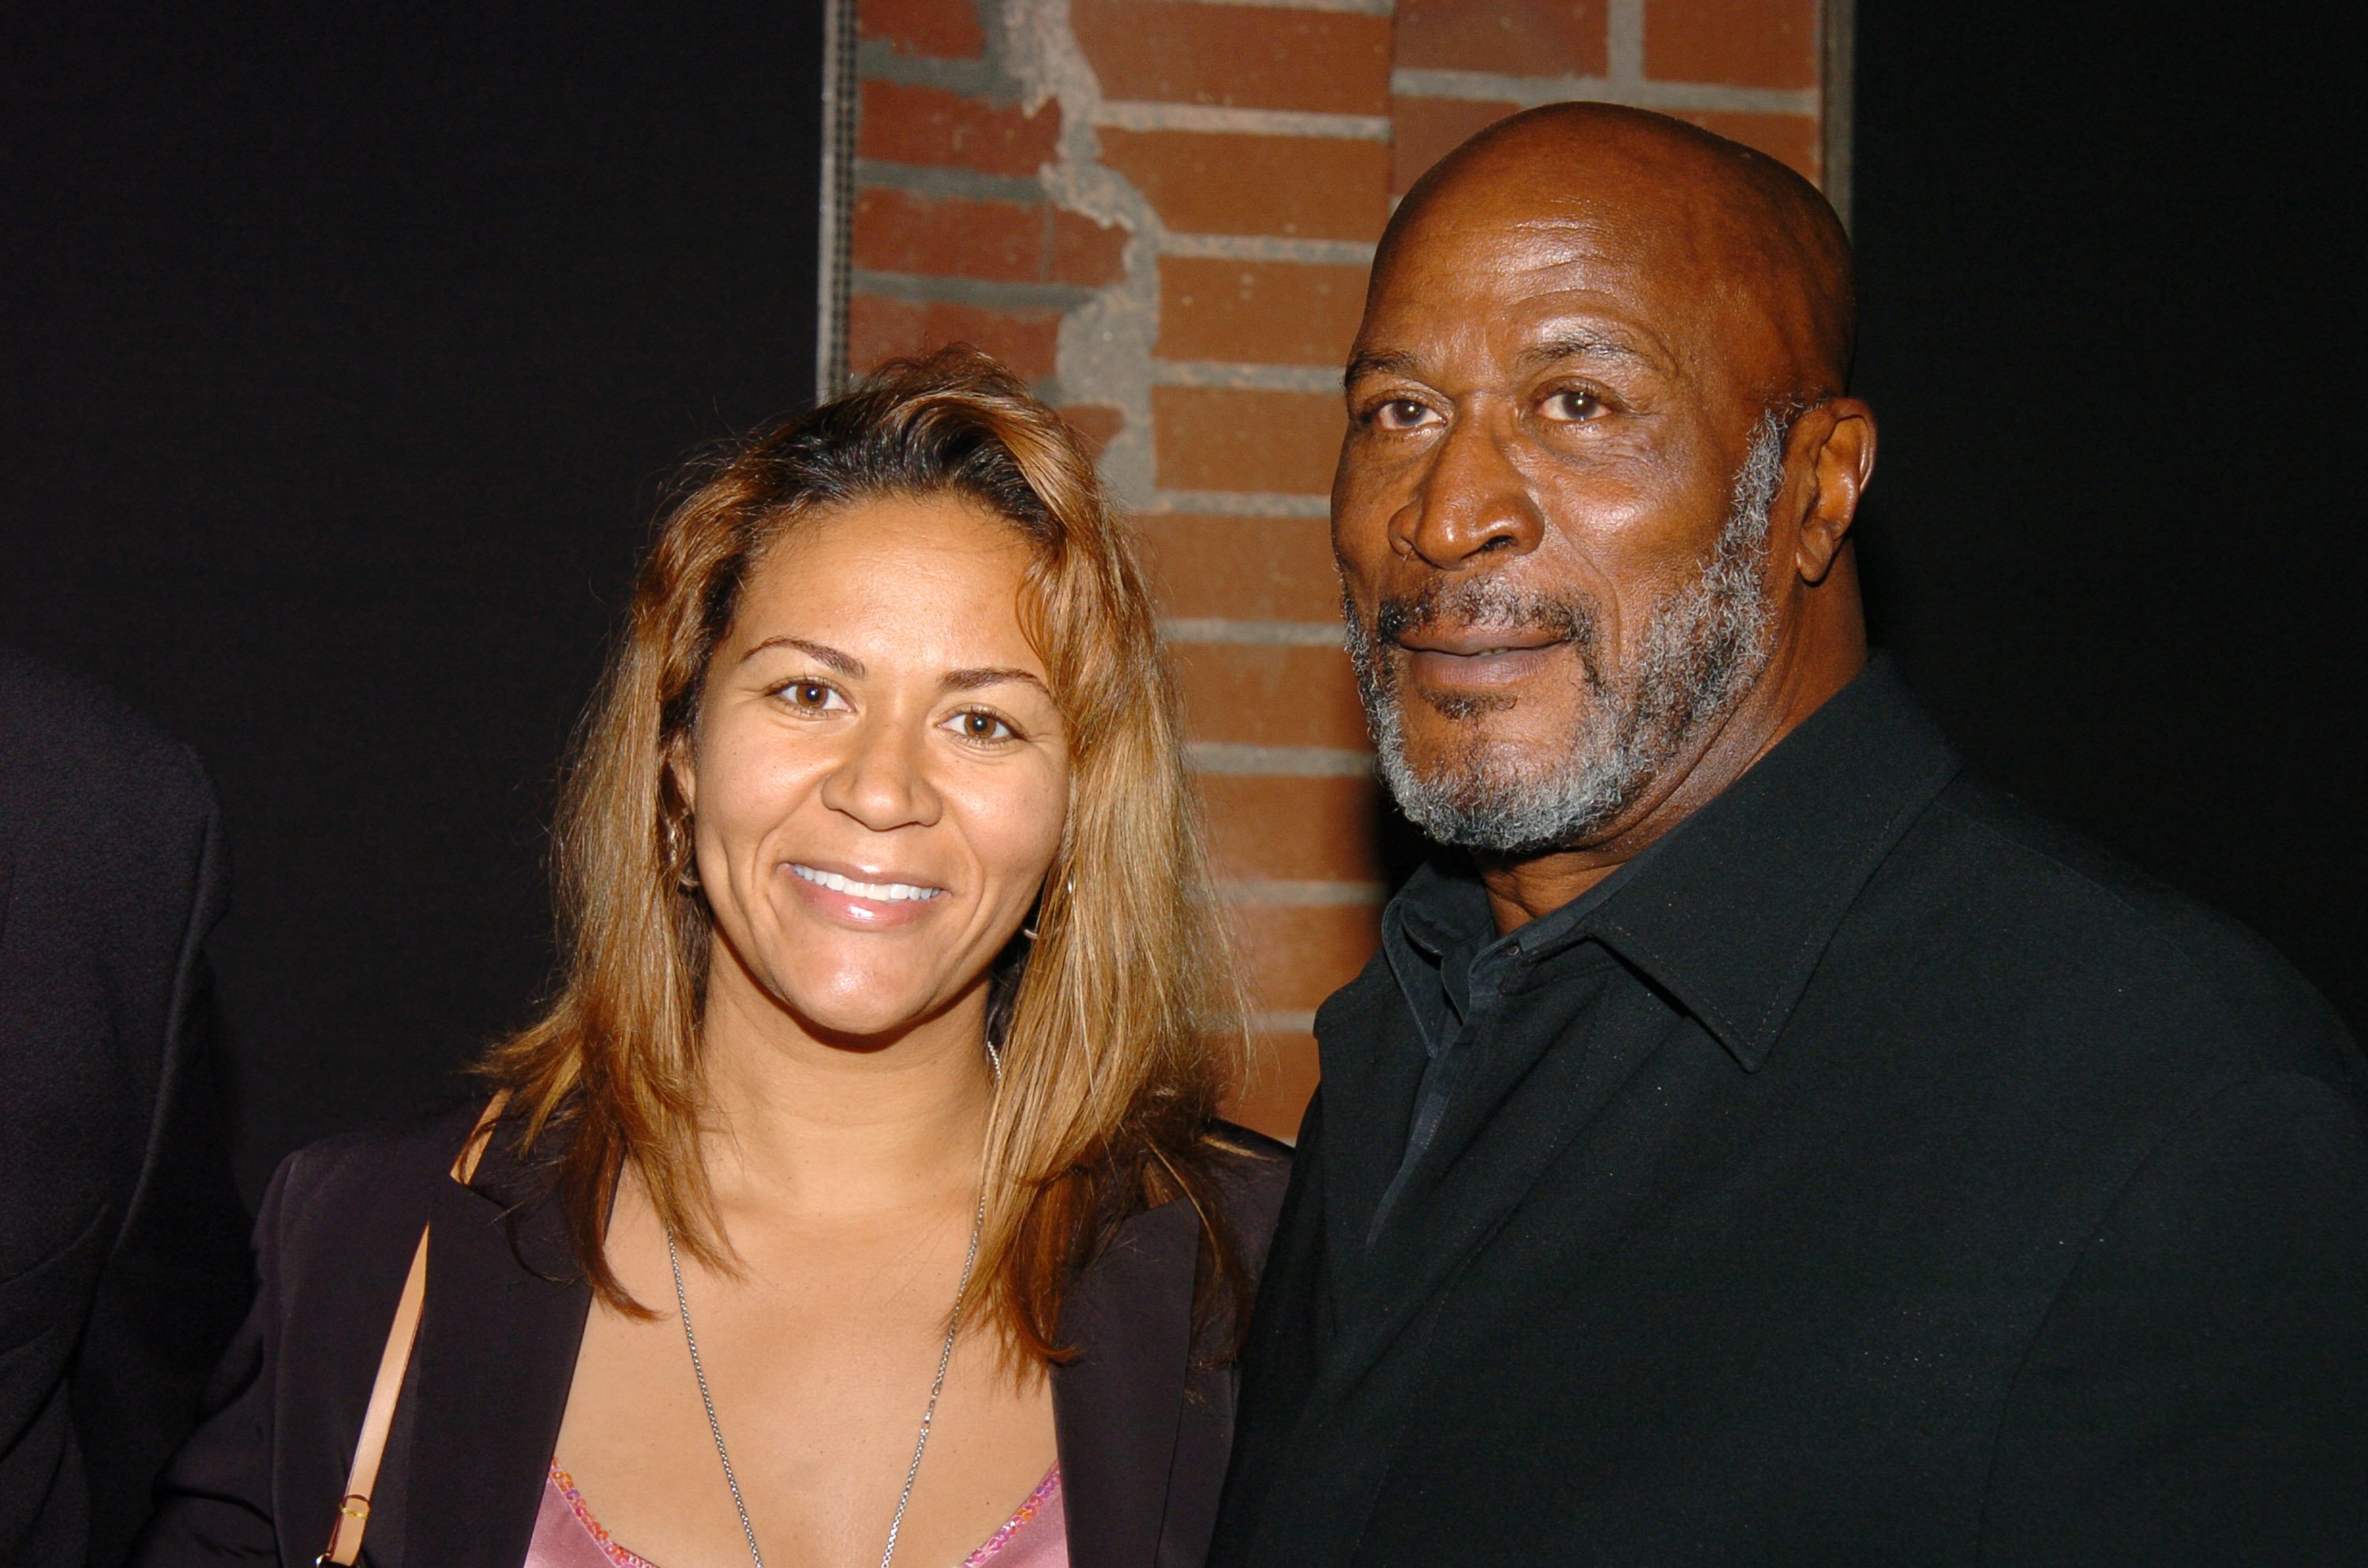 John Amos and daughter Shannon Amos at Cure Autism Now's third annual "Acts of Love" in Los Angeles, California | Photo: Getty Images